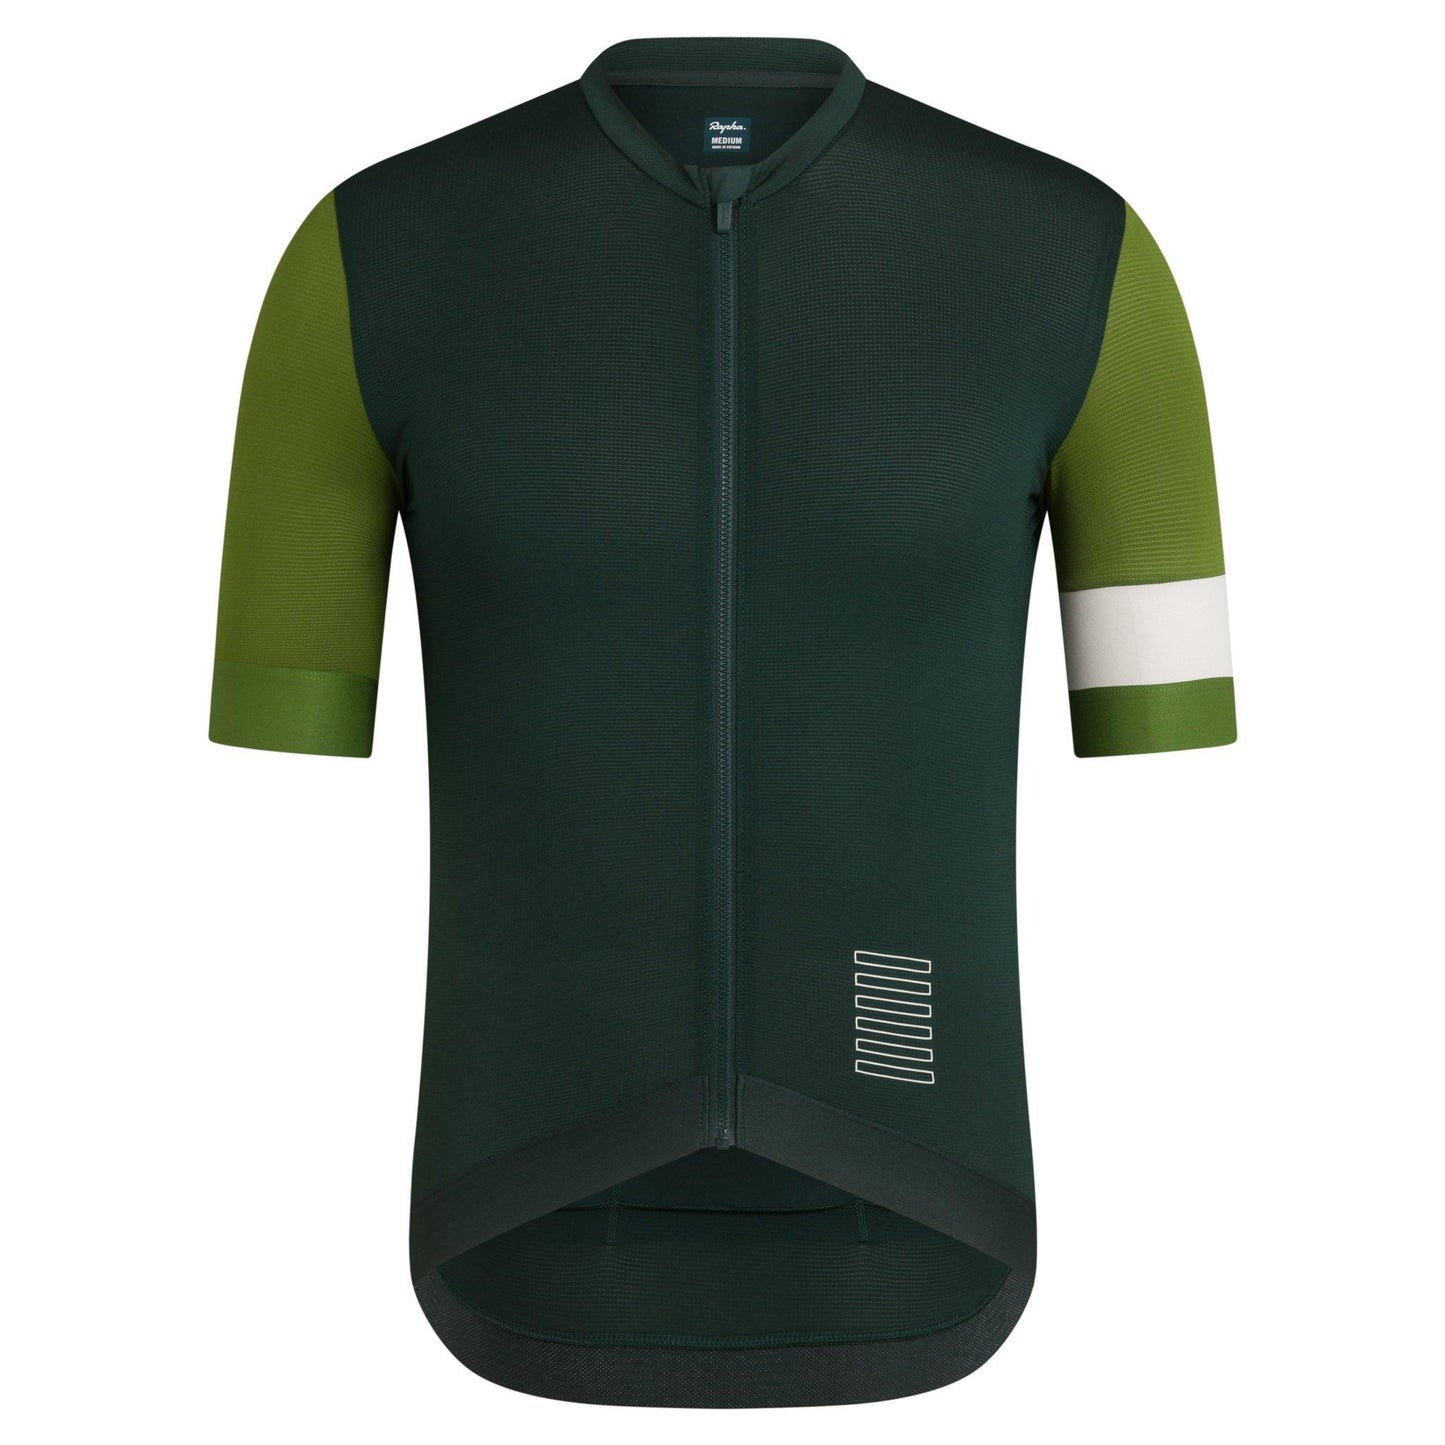 Rapha Mens Pro Team Training Jersey - Dark Green/Green buy online at Woolys Wheels Bicycle Store Sydney with free delivery Australia wide!